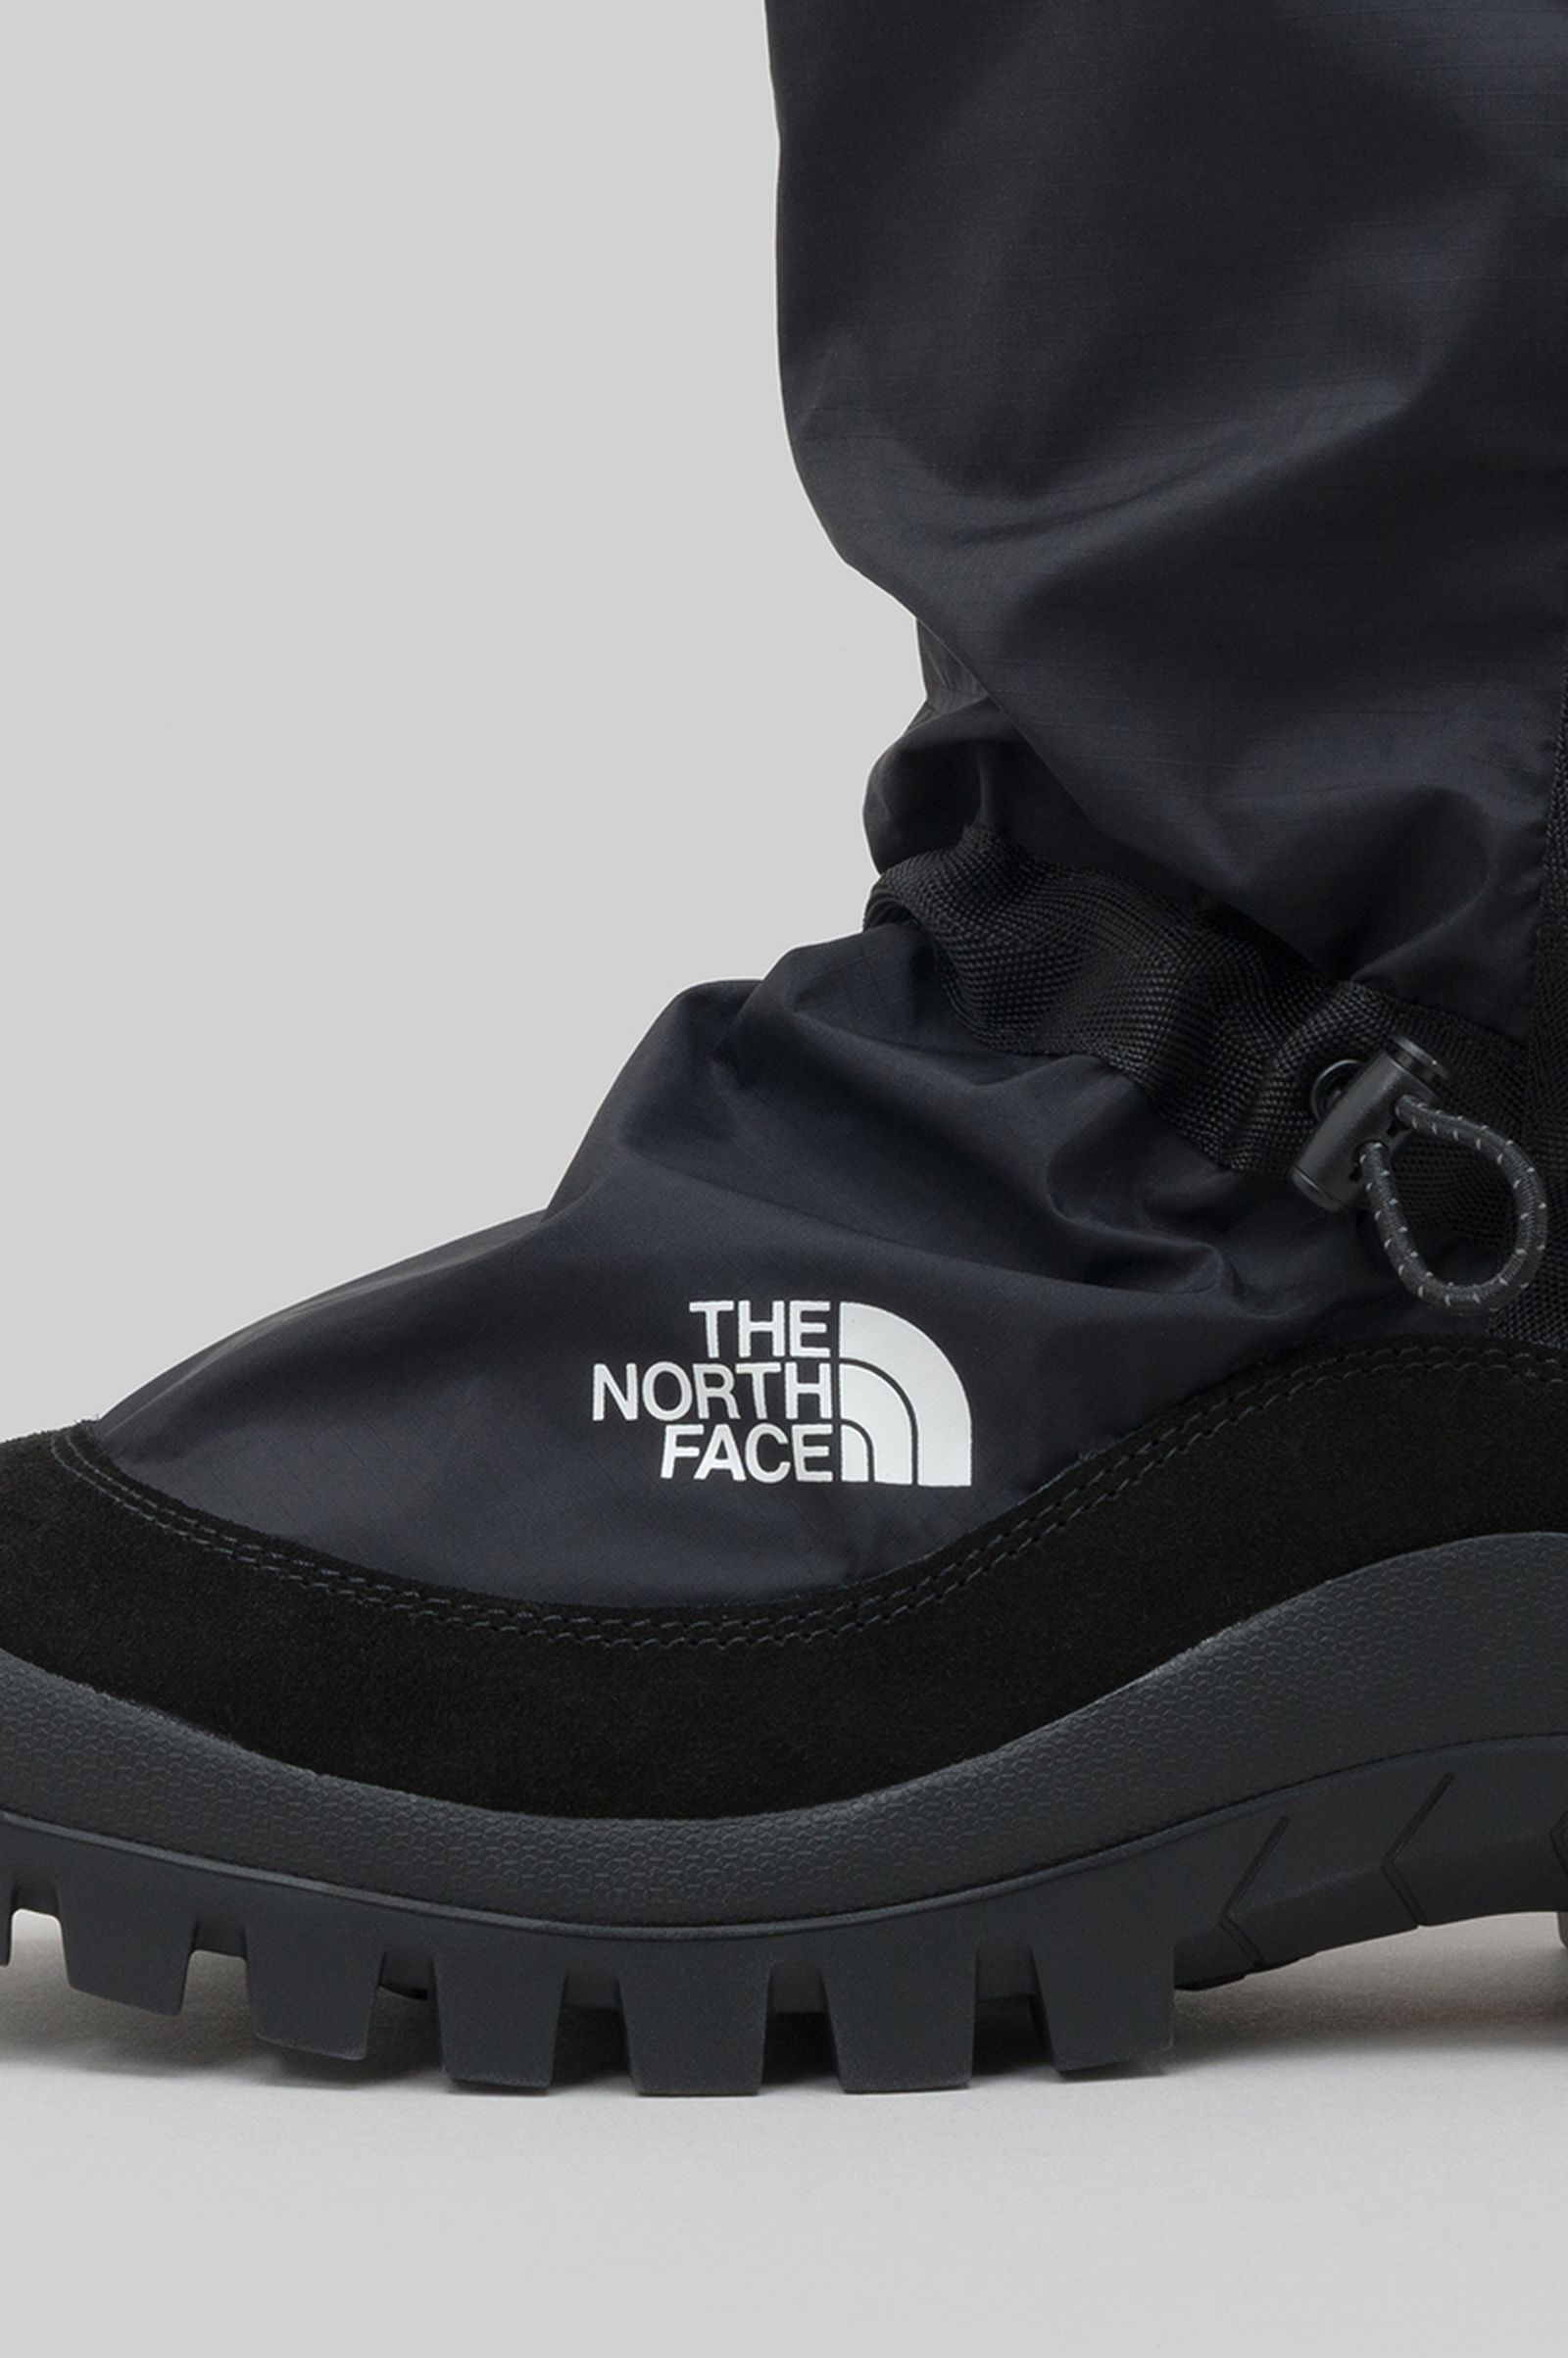 the-north-face-hender-scheme-ss22-collab-collection (28)